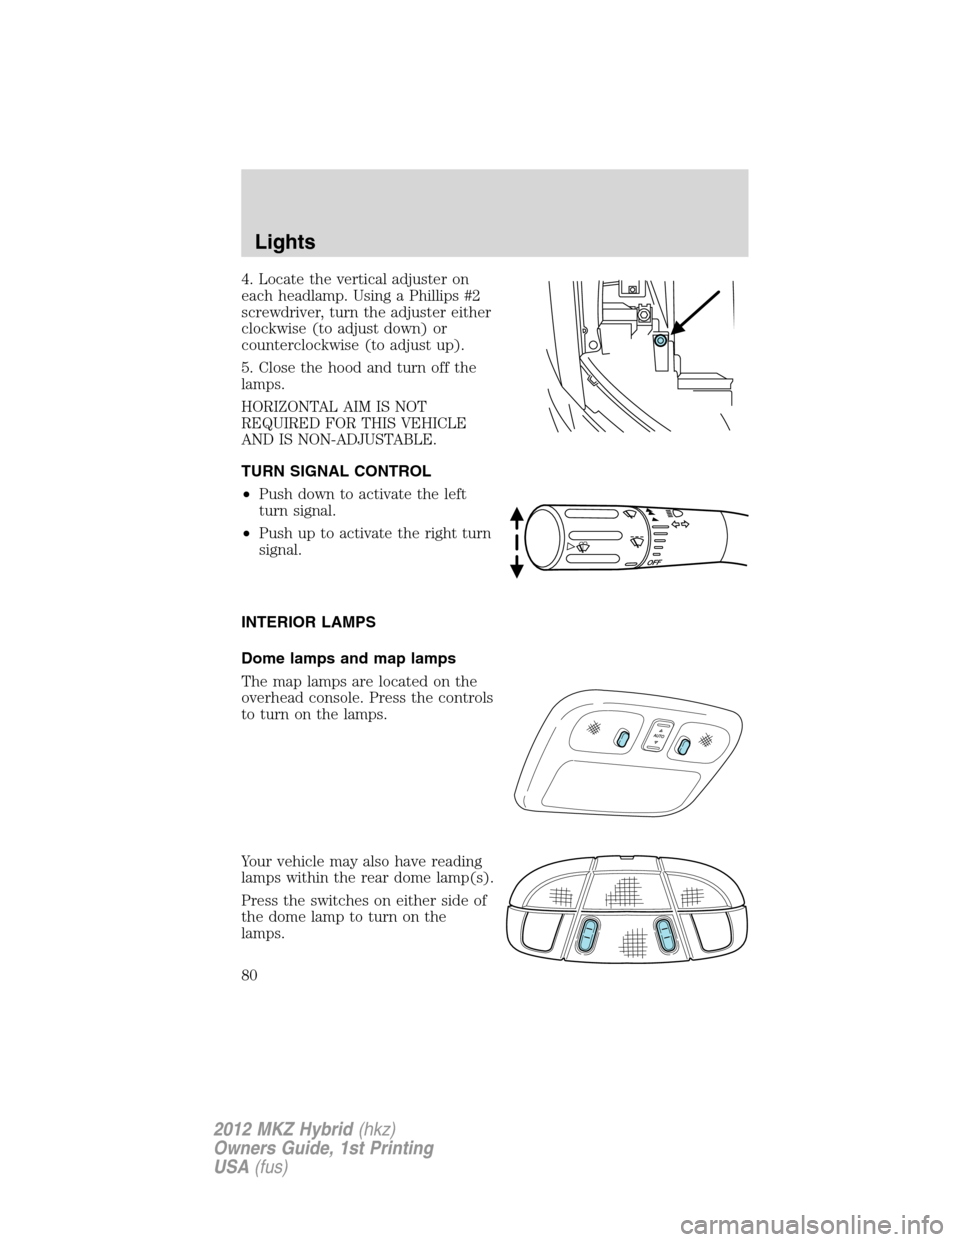 LINCOLN MKZ HYBRID 2012  Owners Manual 4. Locate the vertical adjuster on
each headlamp. Using a Phillips #2
screwdriver, turn the adjuster either
clockwise (to adjust down) or
counterclockwise (to adjust up).
5. Close the hood and turn of